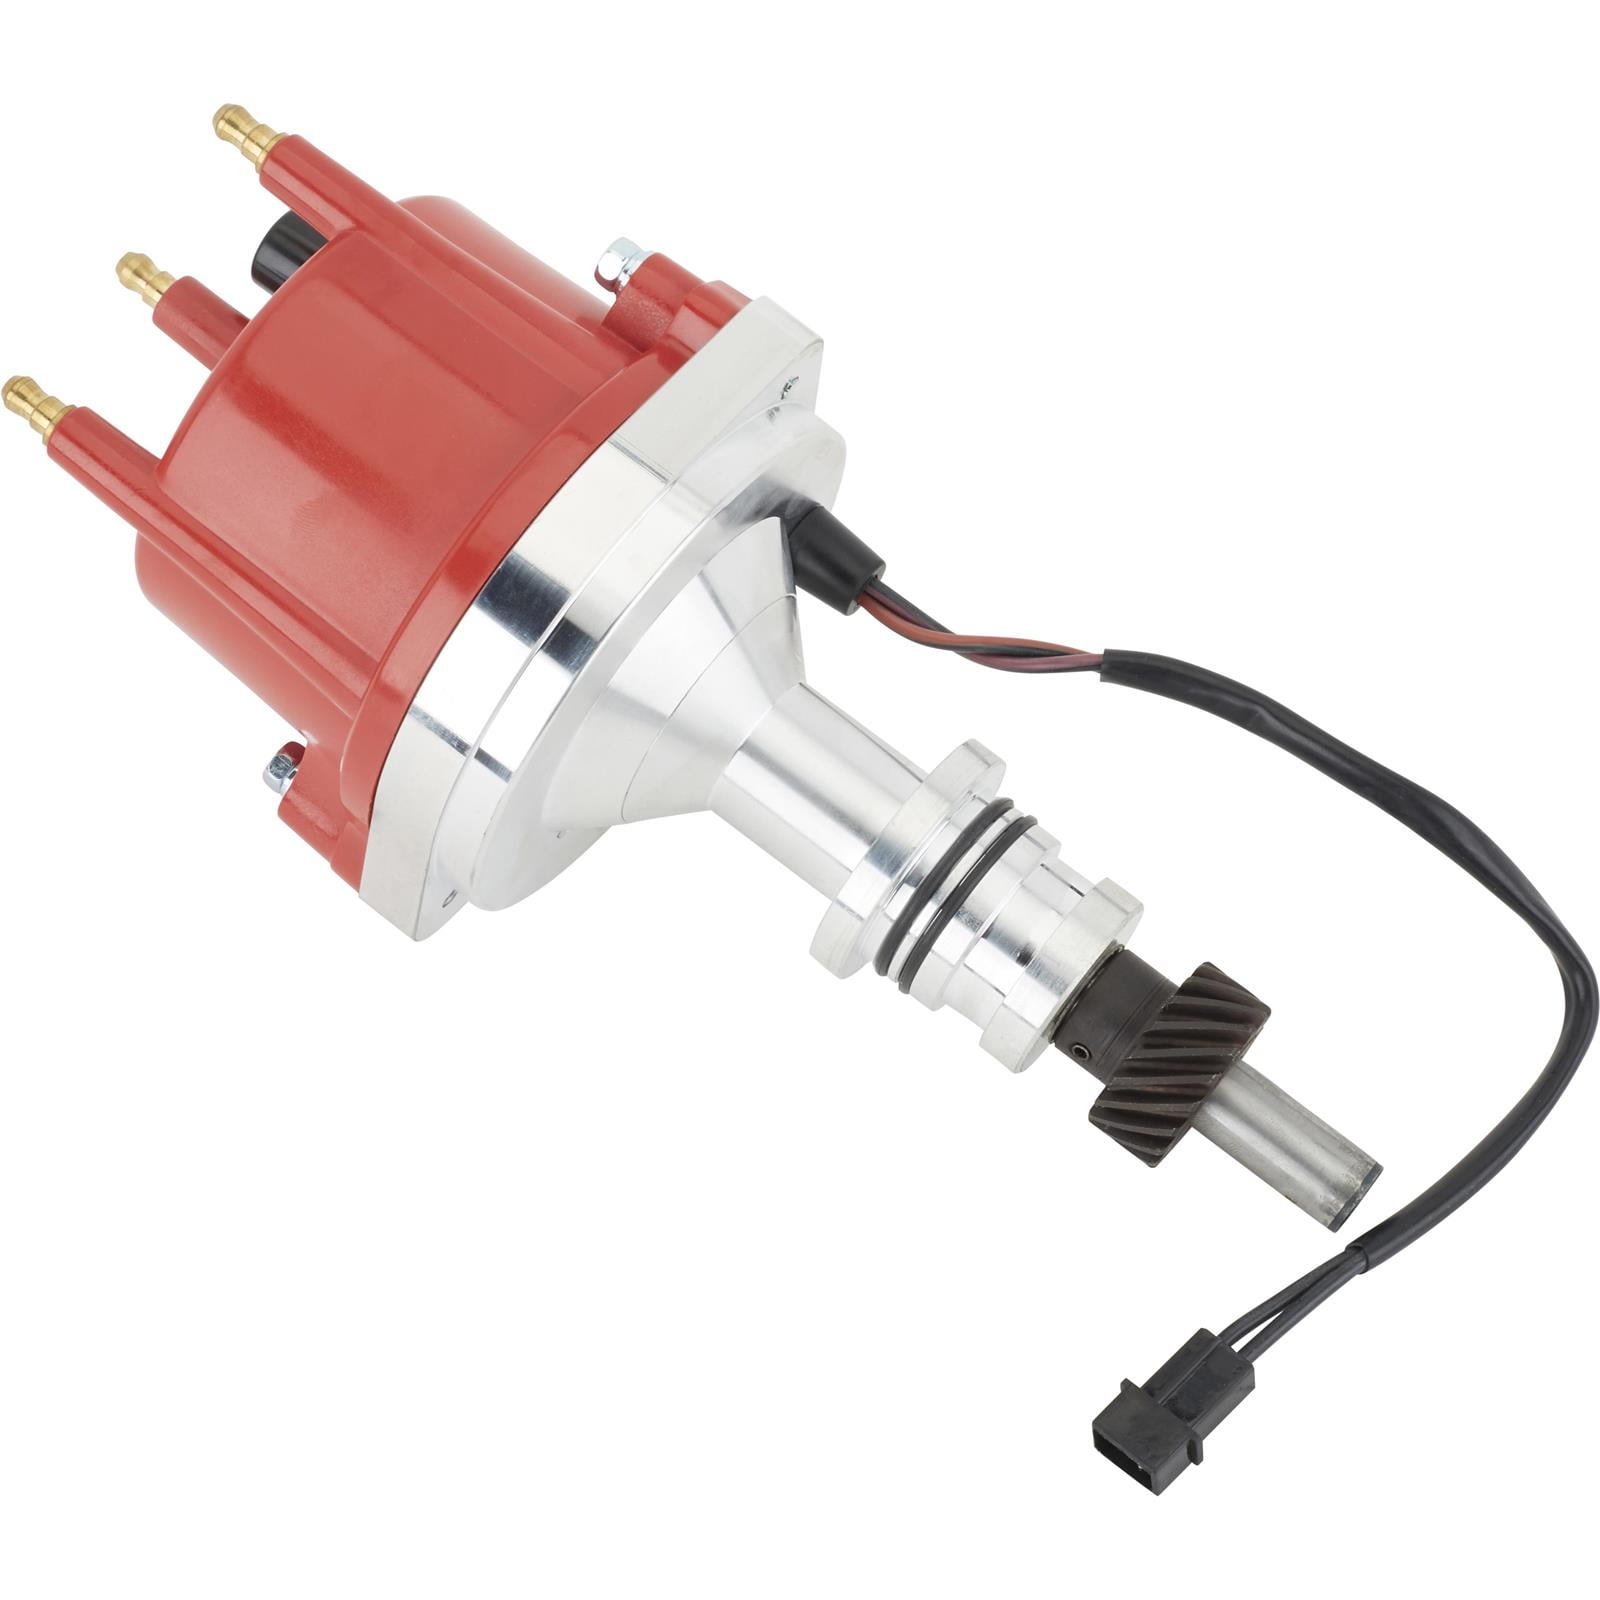 New Distributor Compatible With Honda Accord EX 2.2L 1994 1995 94 95  30100-P0A-A01 30105-P0A-A01 D4J9204 F22B1 F22B アウトレット最安 車、バイク、自転車 